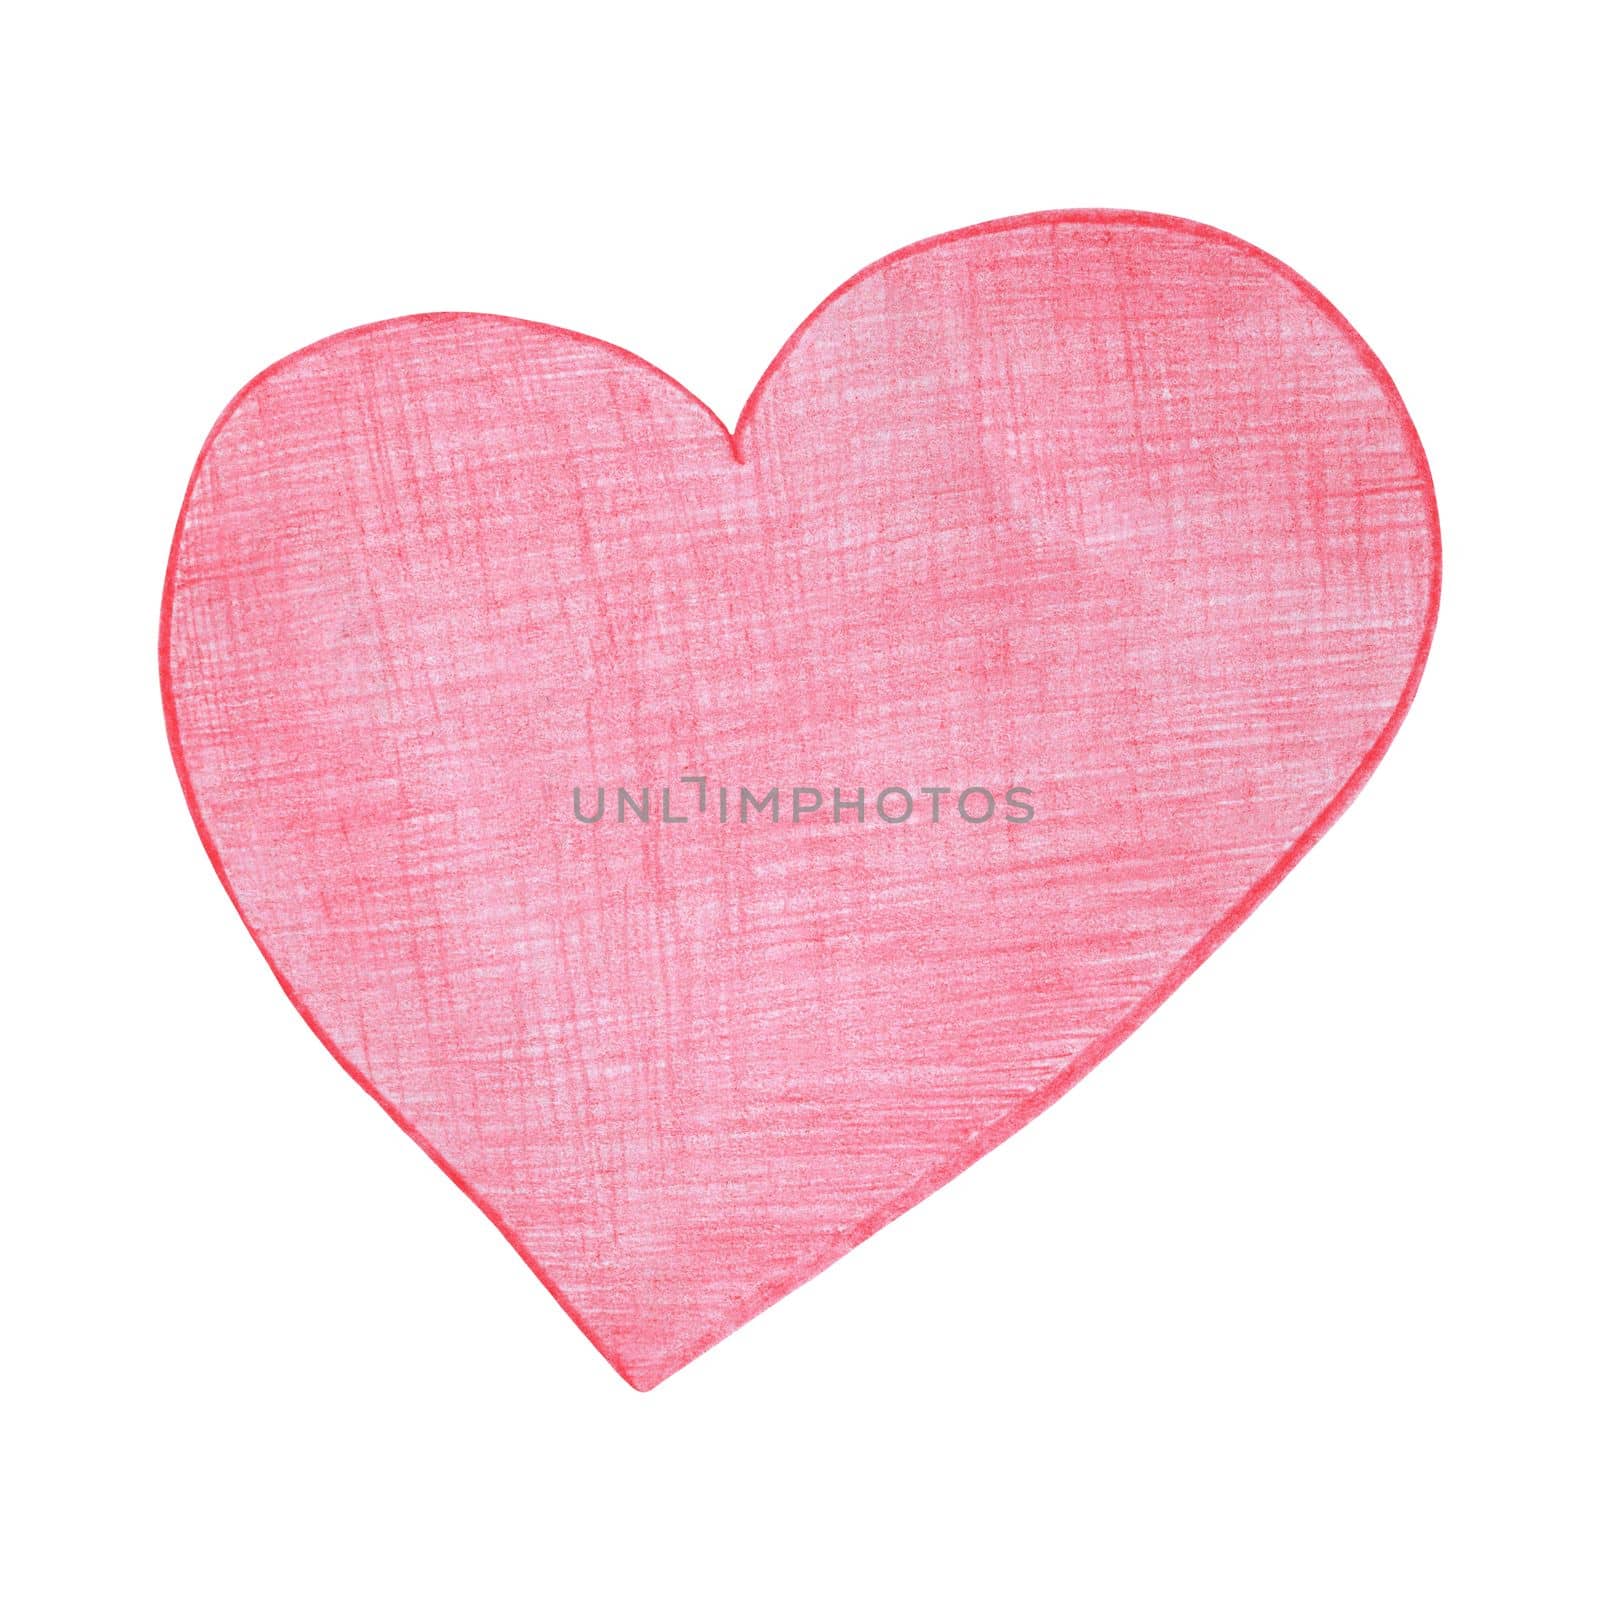 Red Heart Drawn by Colored Pencil. The Sign of World Heart Day. Symbol of Valentines Day. Heart Shape Isolated on White Background.